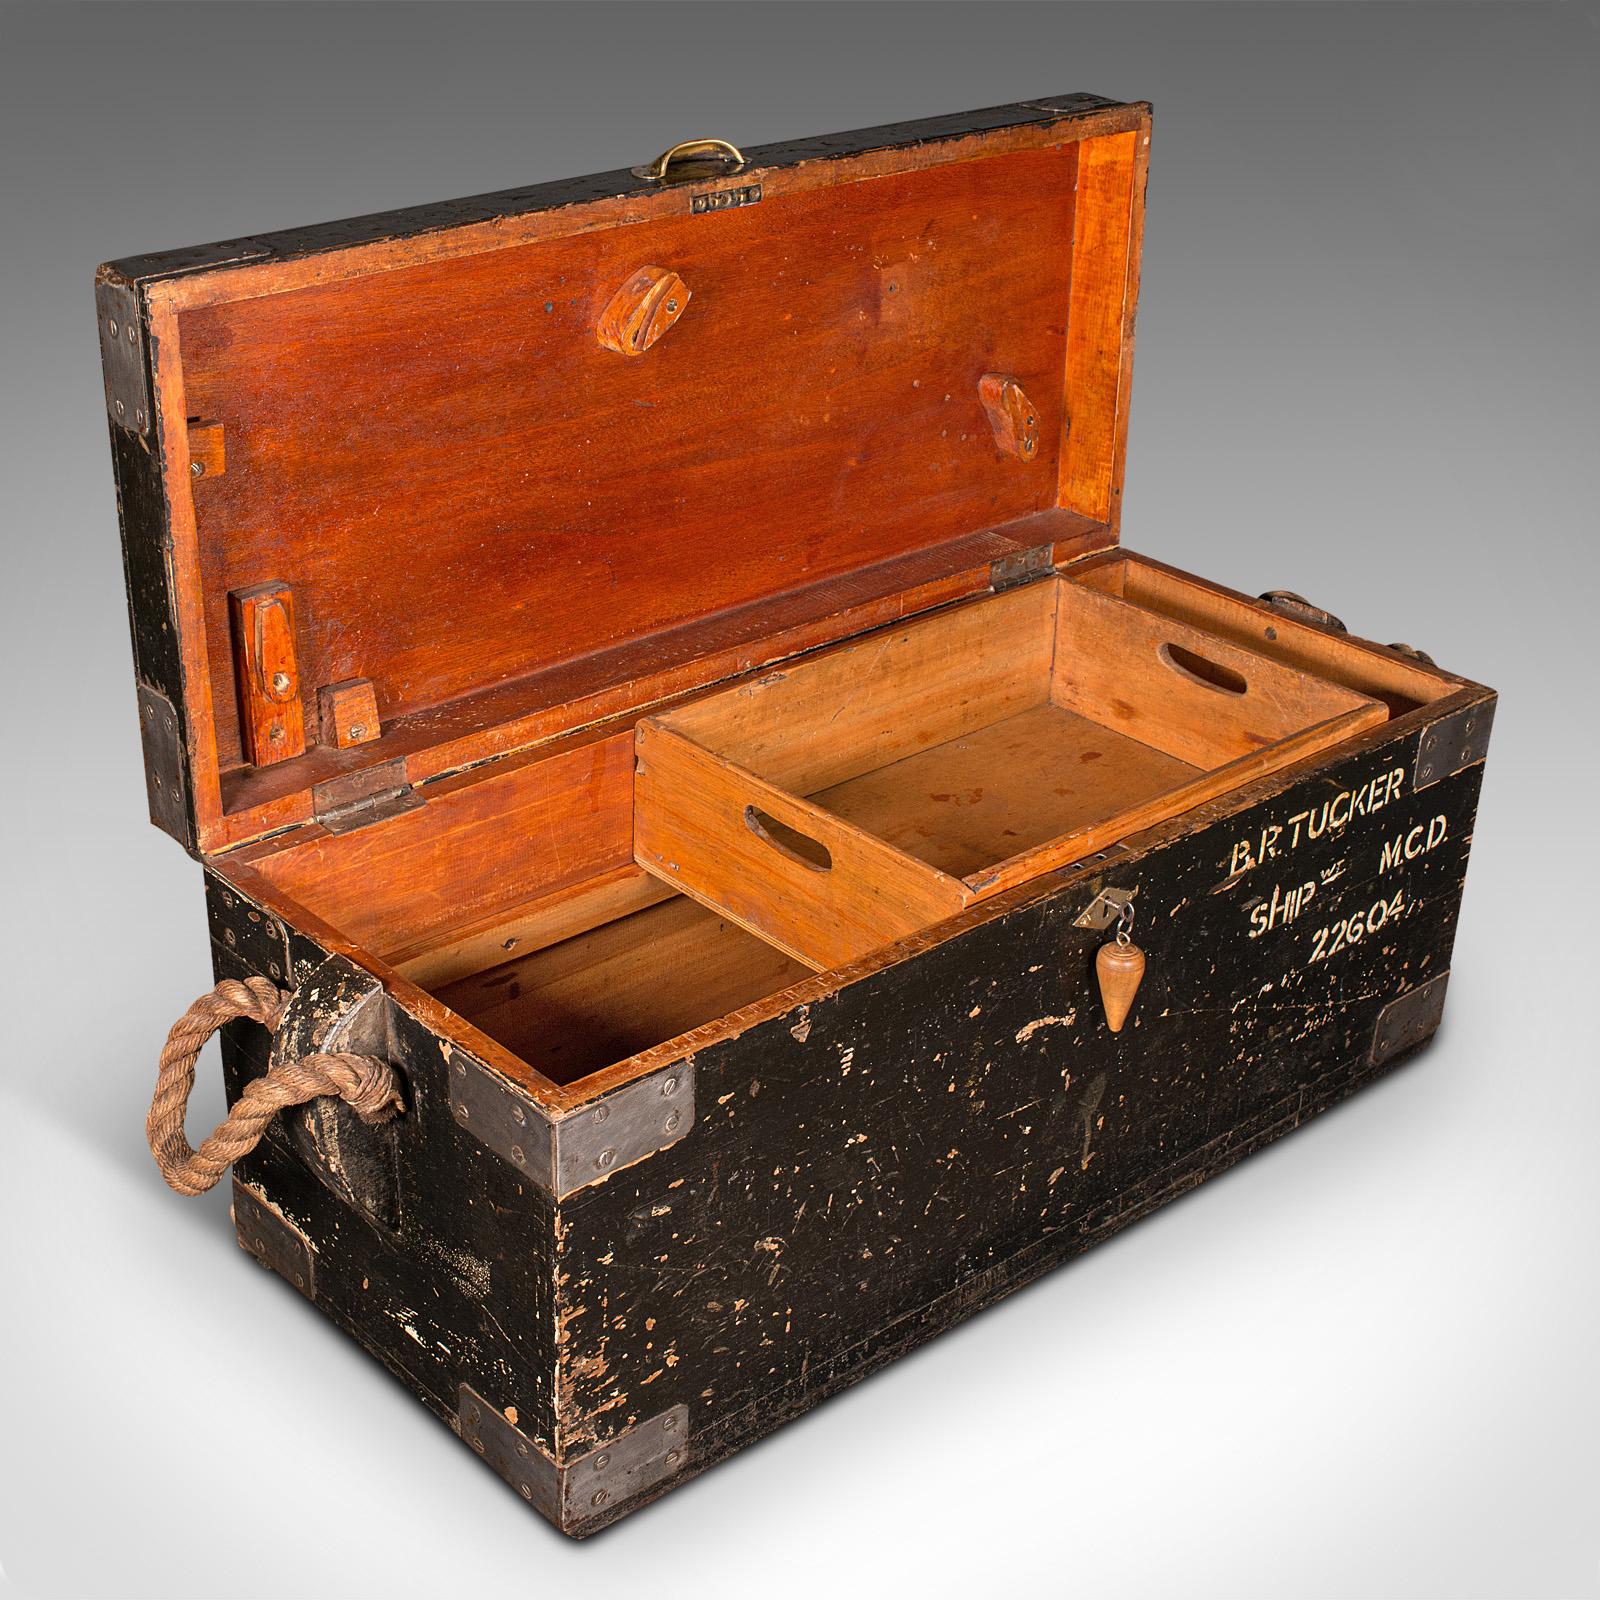 Vintage Shipwright's Tool Chest, English, Cedar, Pine, Craftsman's Trunk, C.1940 For Sale 1